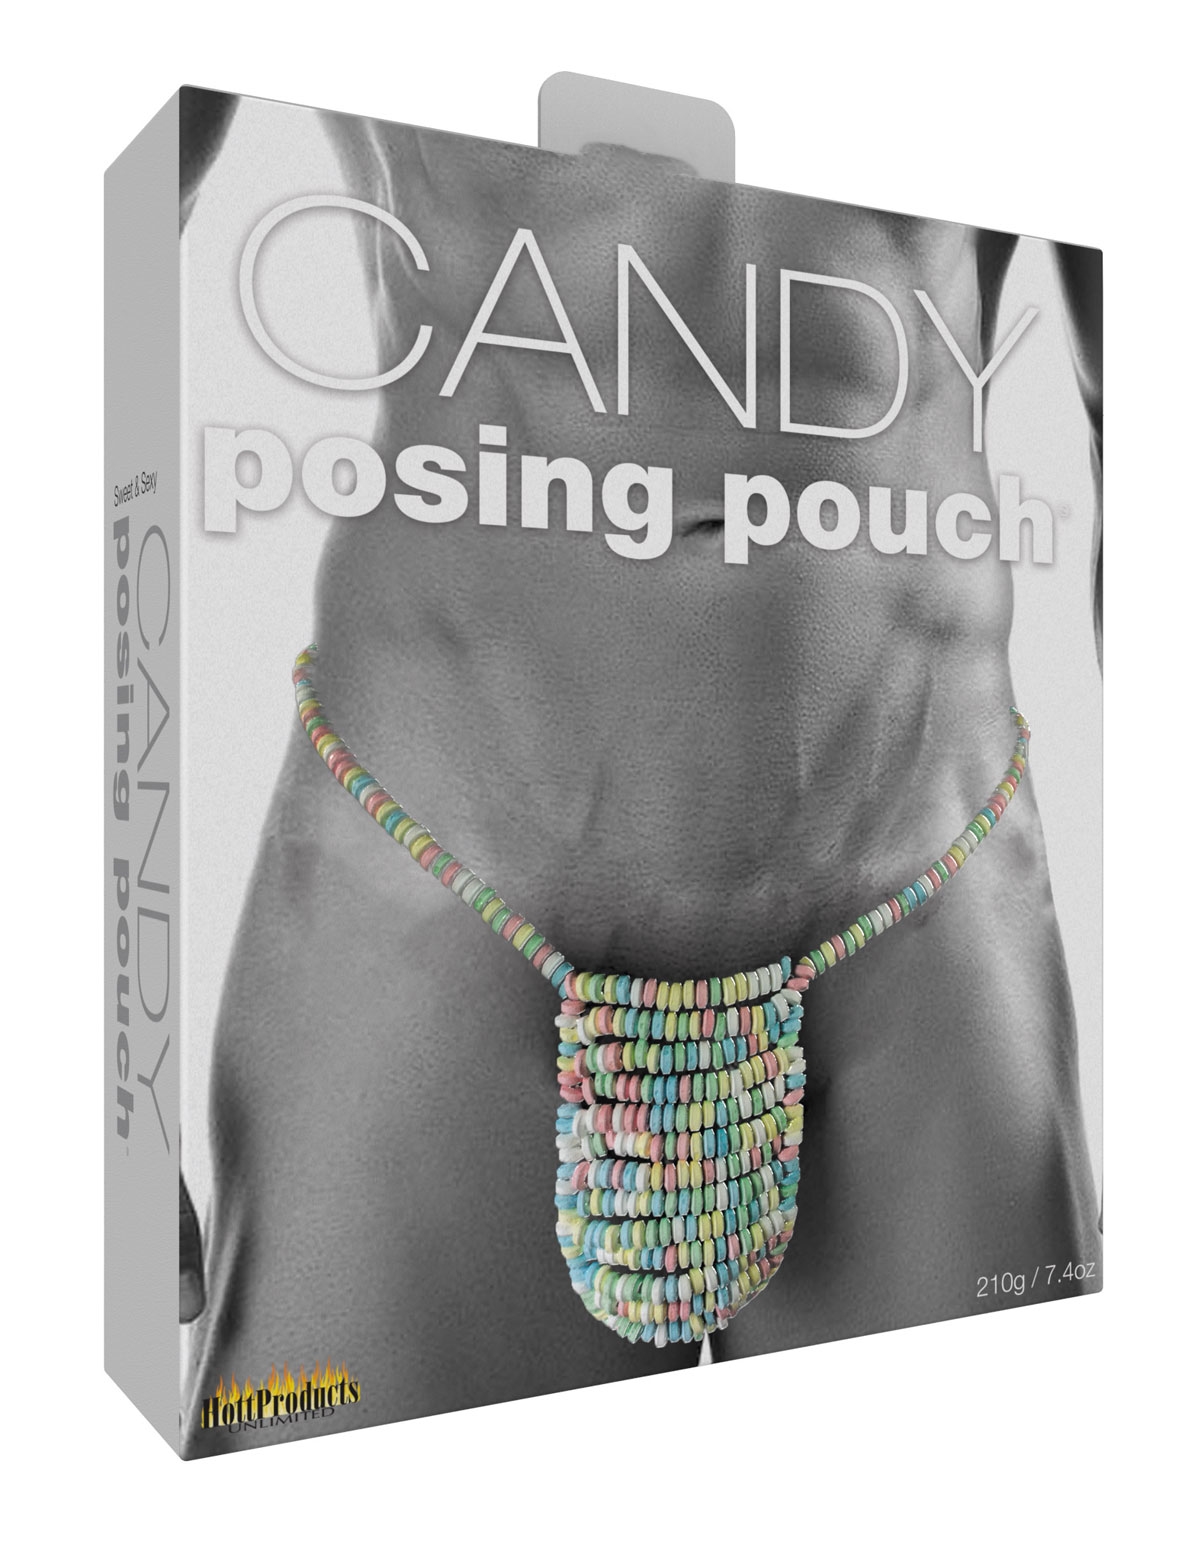 alternate image for Candy Posing Pouch